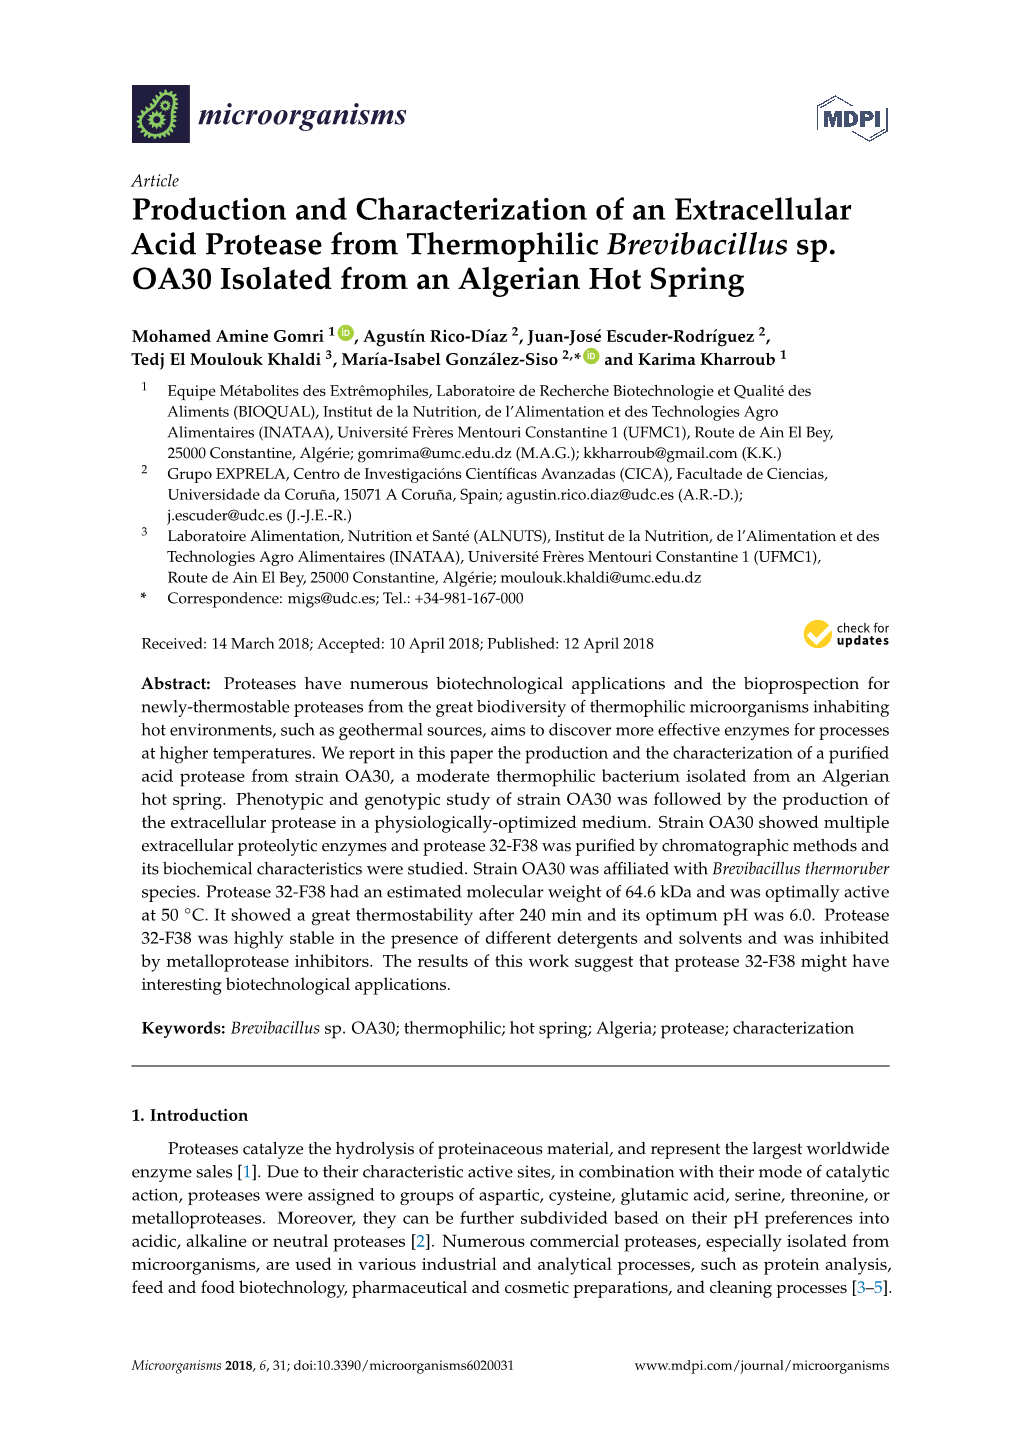 Production and Characterization of an Extracellular Acid Protease from Thermophilic Brevibacillus Sp